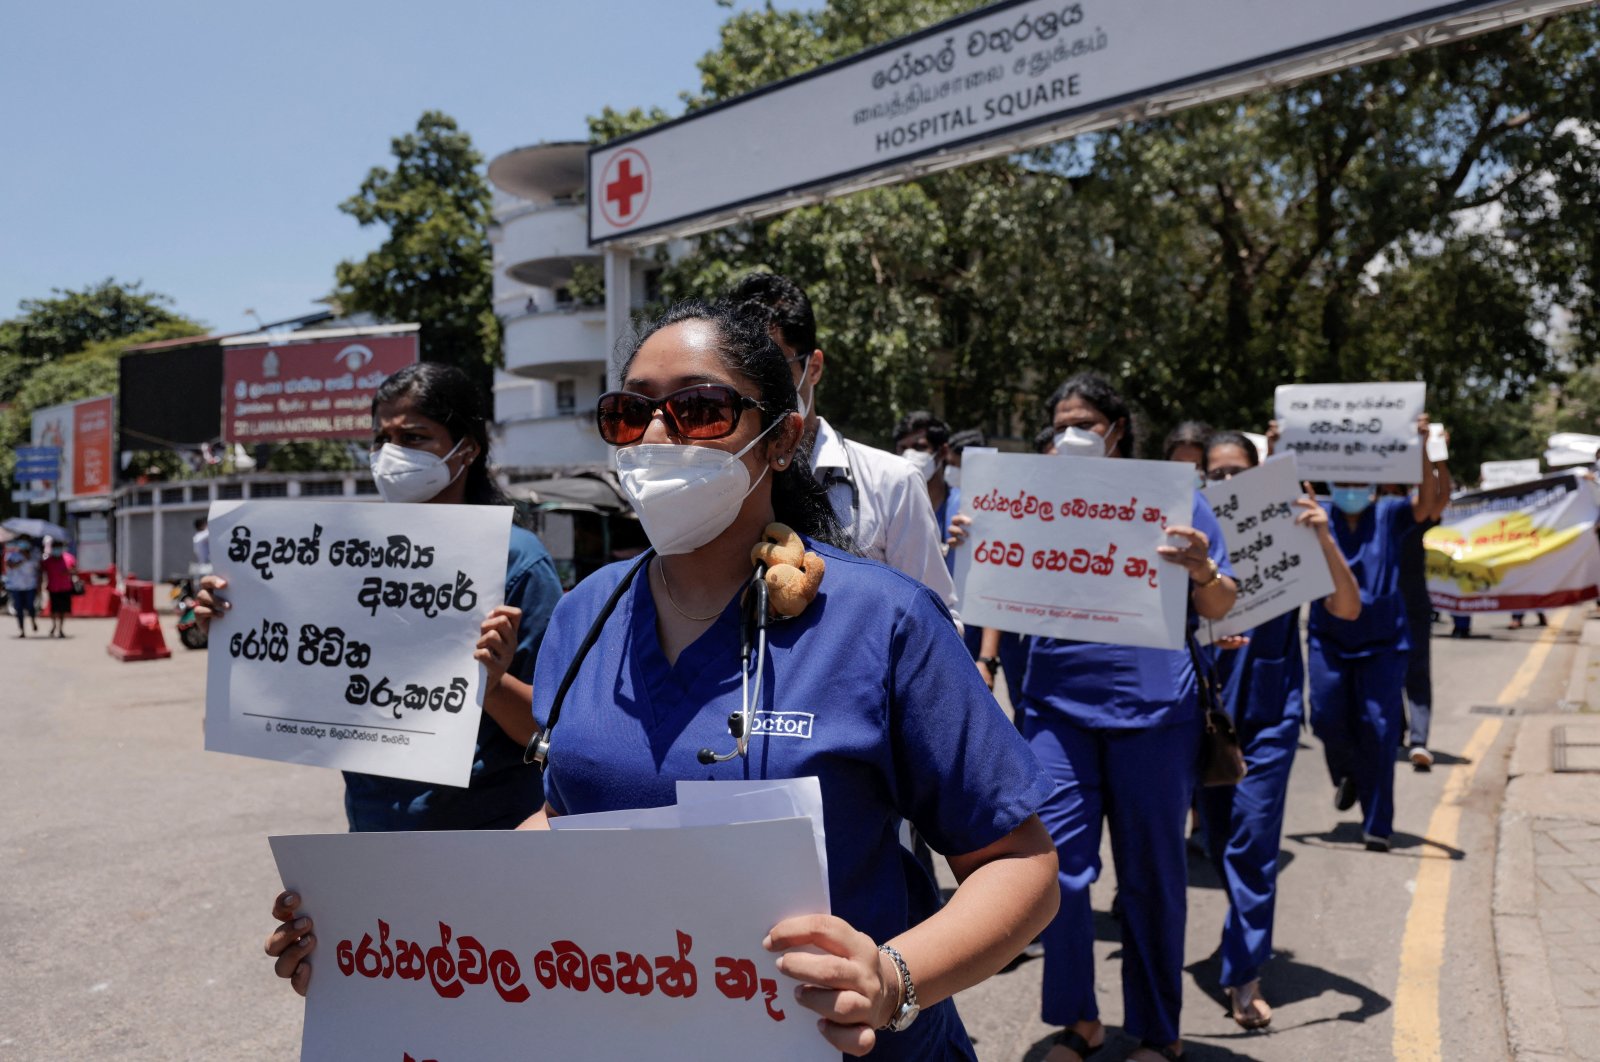 Government Medical Officers; Association members walk with placards protesting against Sri Lankan President Gotabaya Rajapaksa after his government lost its majority in parliament during a demonstration near the parliament building in Colombo, Sri Lanka, April 6, 2022. (Reuters Photo)